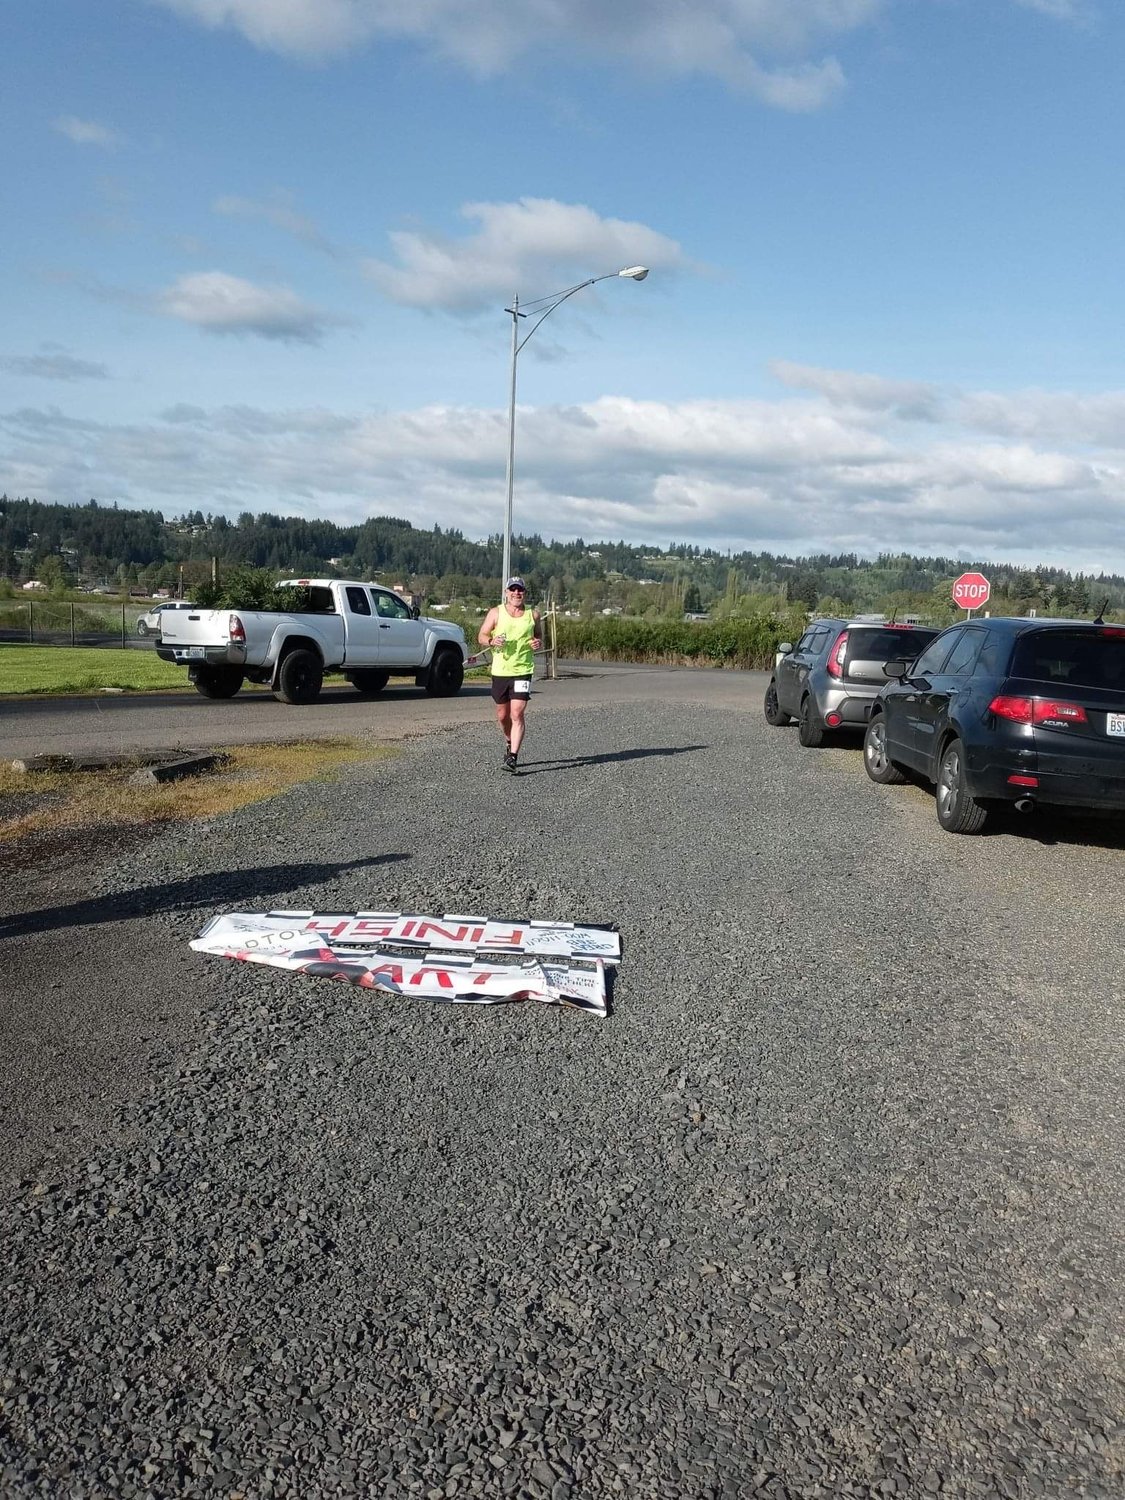 Chris Cruzan is the first place male runner in the the Run for Five, Recovery is Alive 5k in Chehalis on Monday.